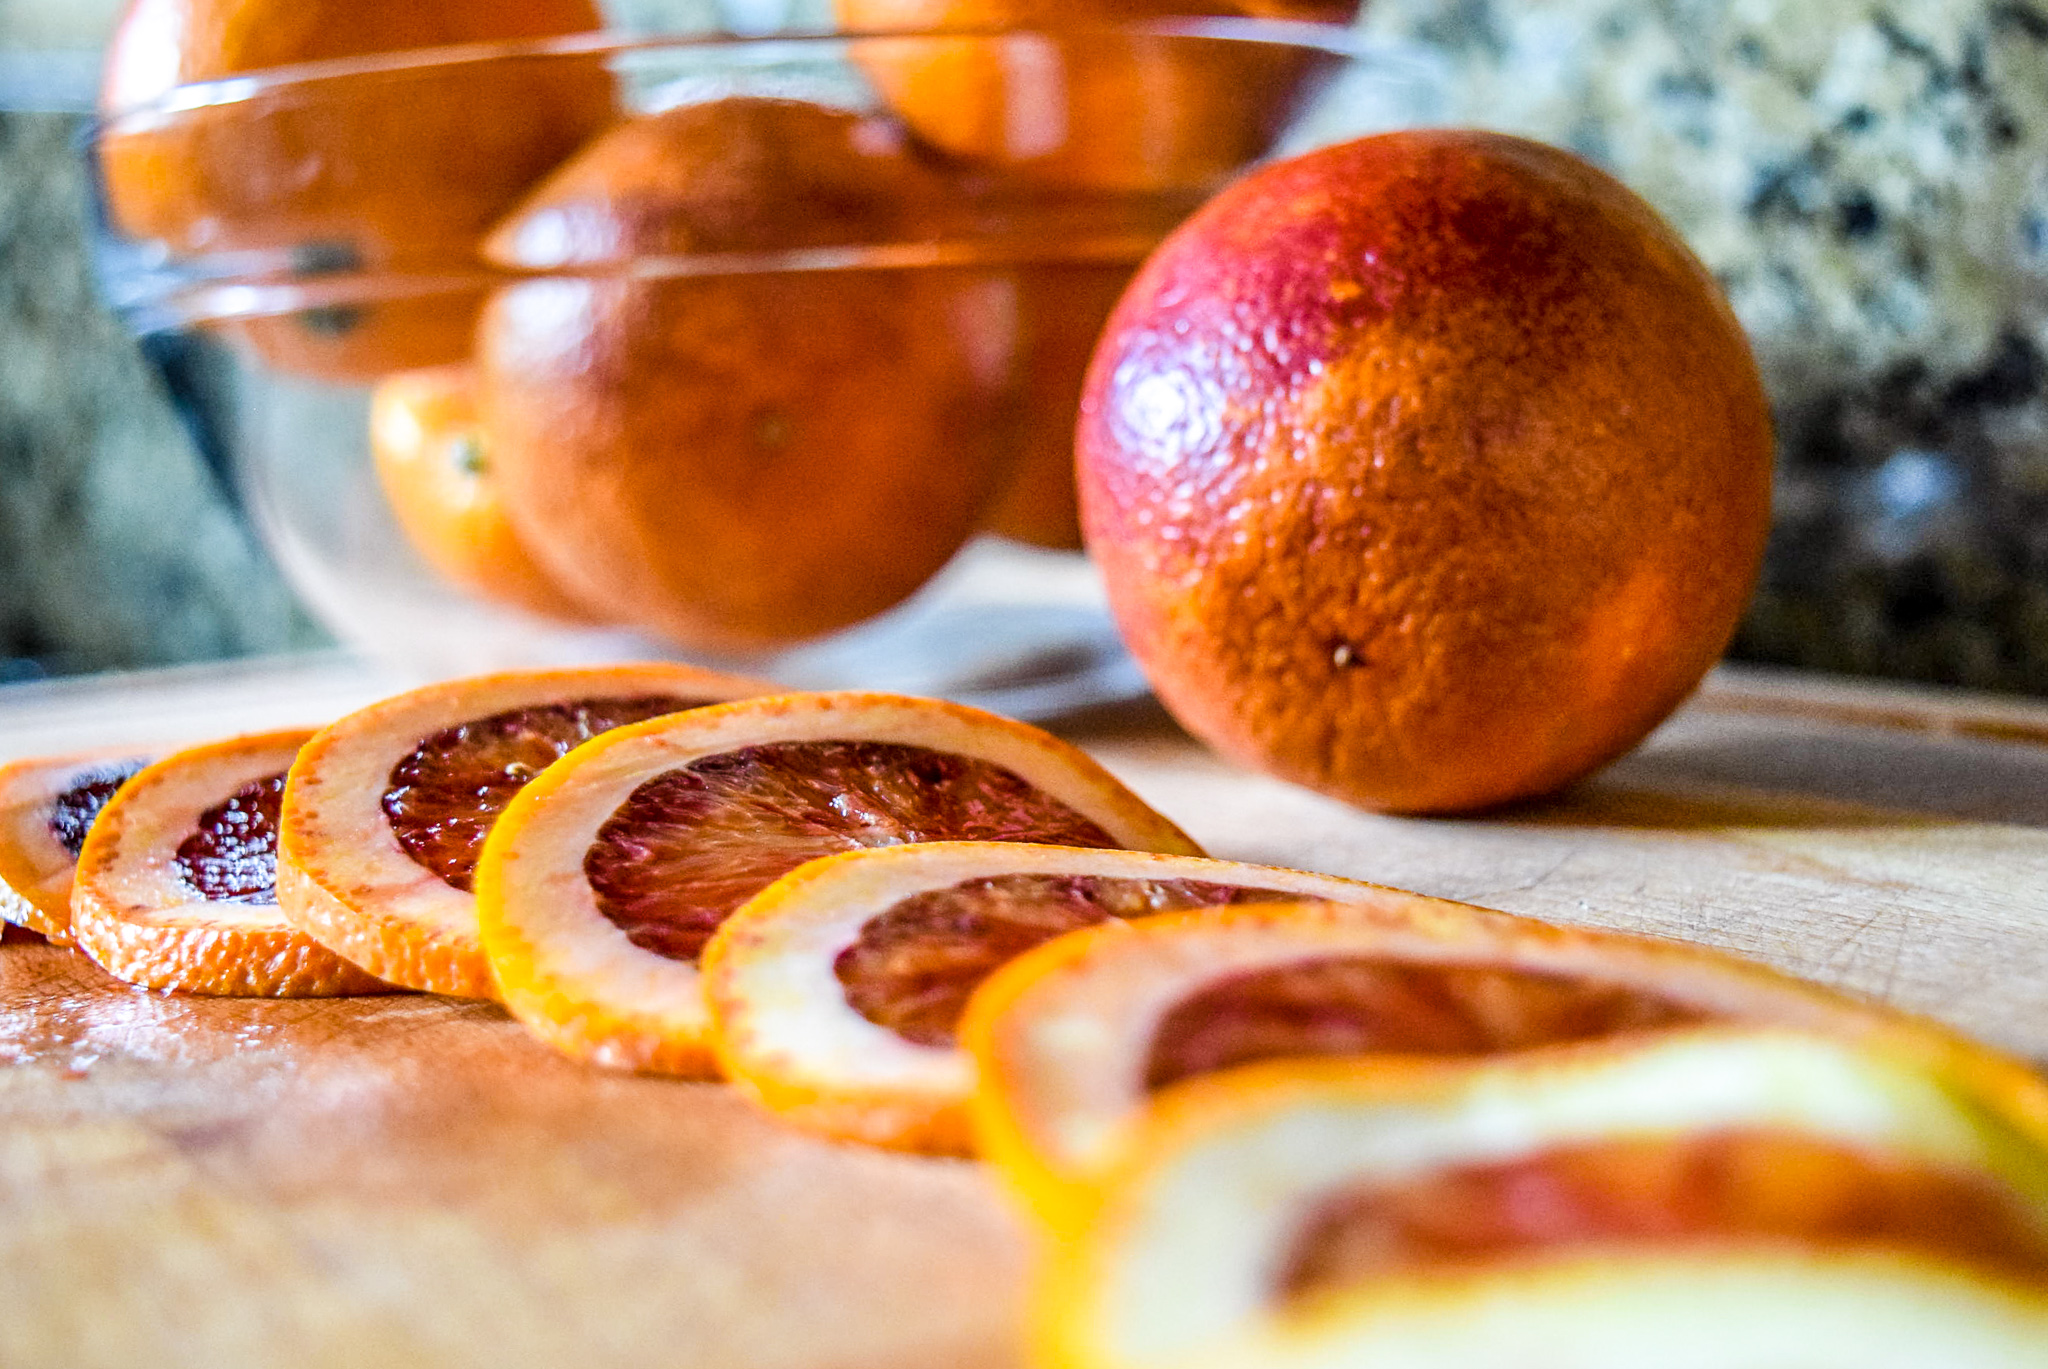 Sliced blood orange rounds in preparation for candying from front up close